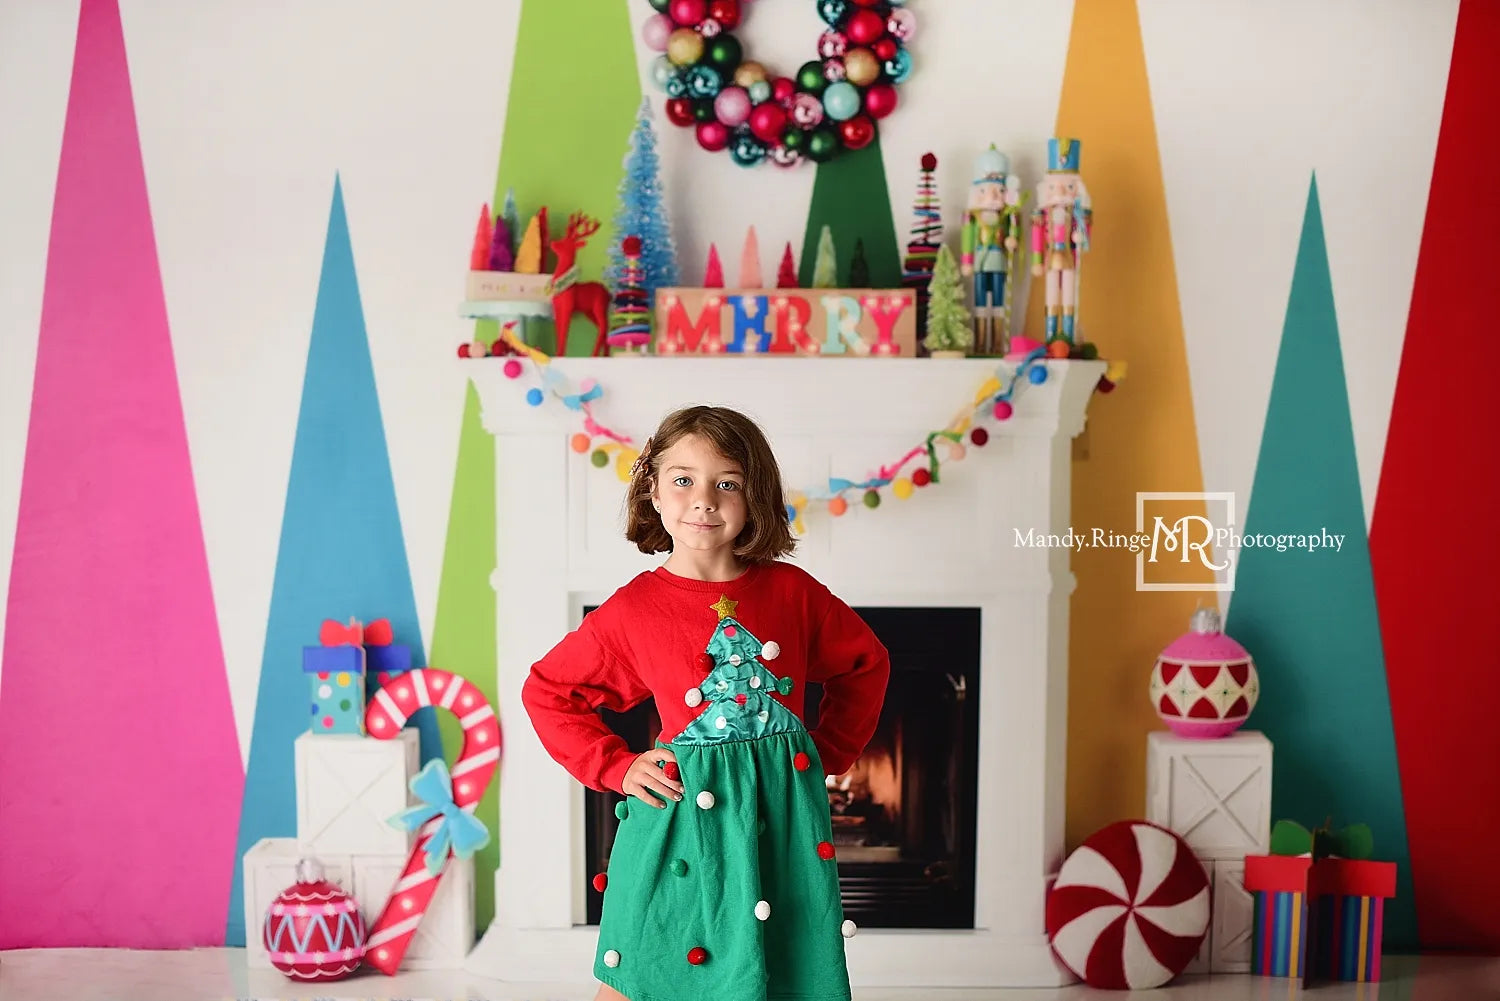 Kate Merry and Bright Christmas Fireplace Backdrop Designed by Mandy Ringe Photography